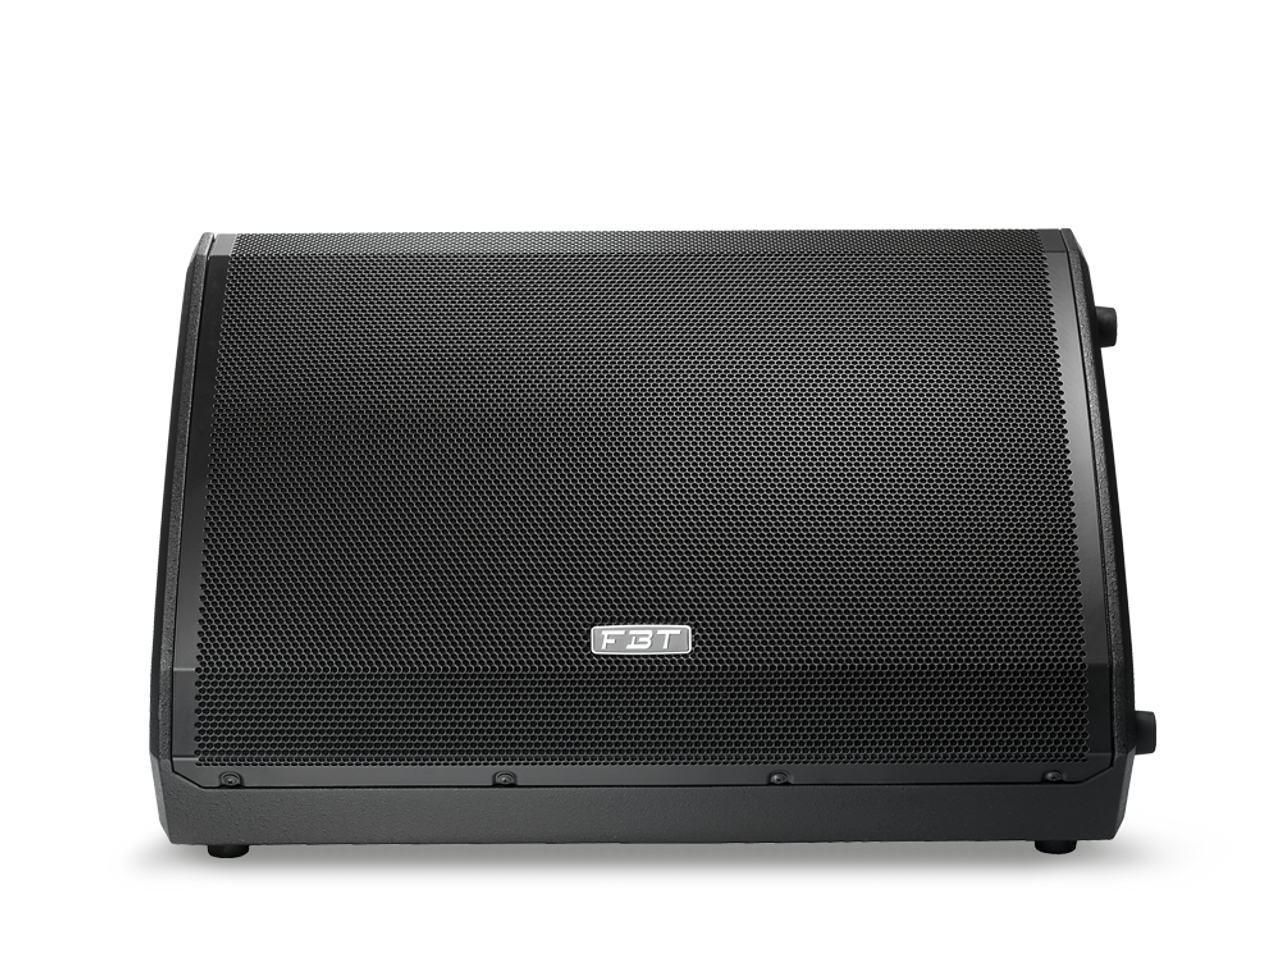 FBT Ventis 115MA 15" Processed Active Stage Monitor (Each)